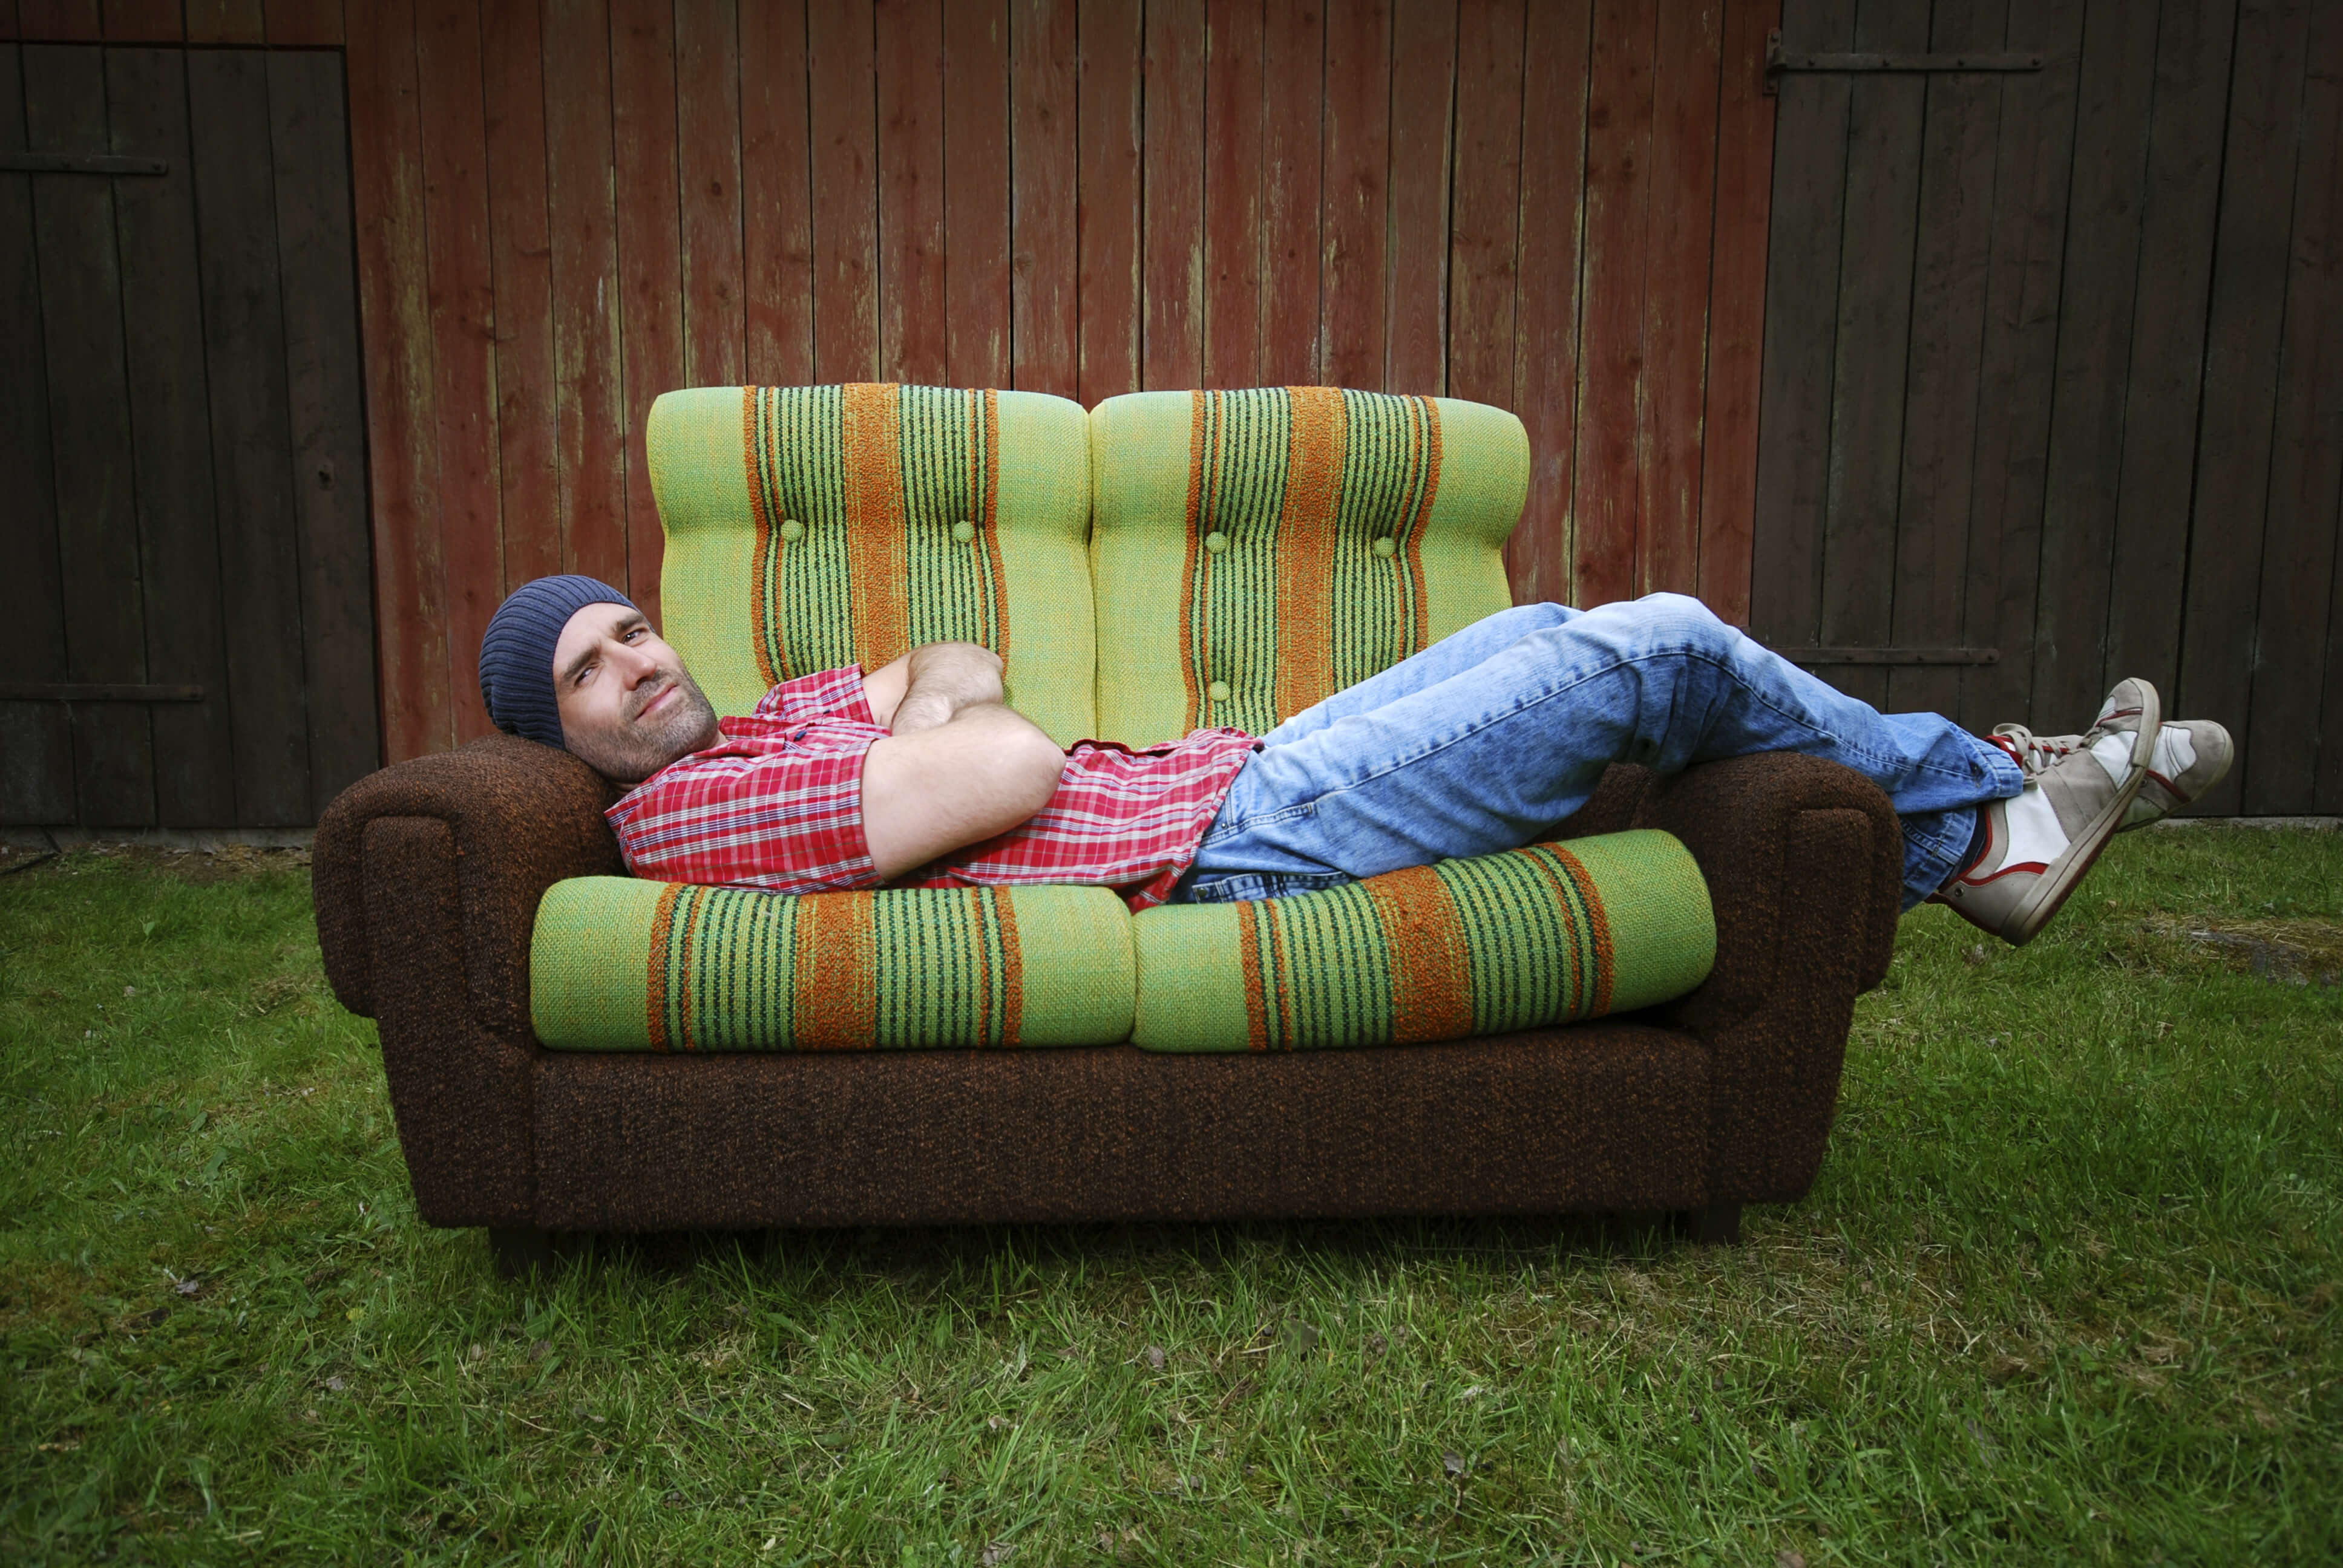 young self reliant man lying on a couch in the outdoors